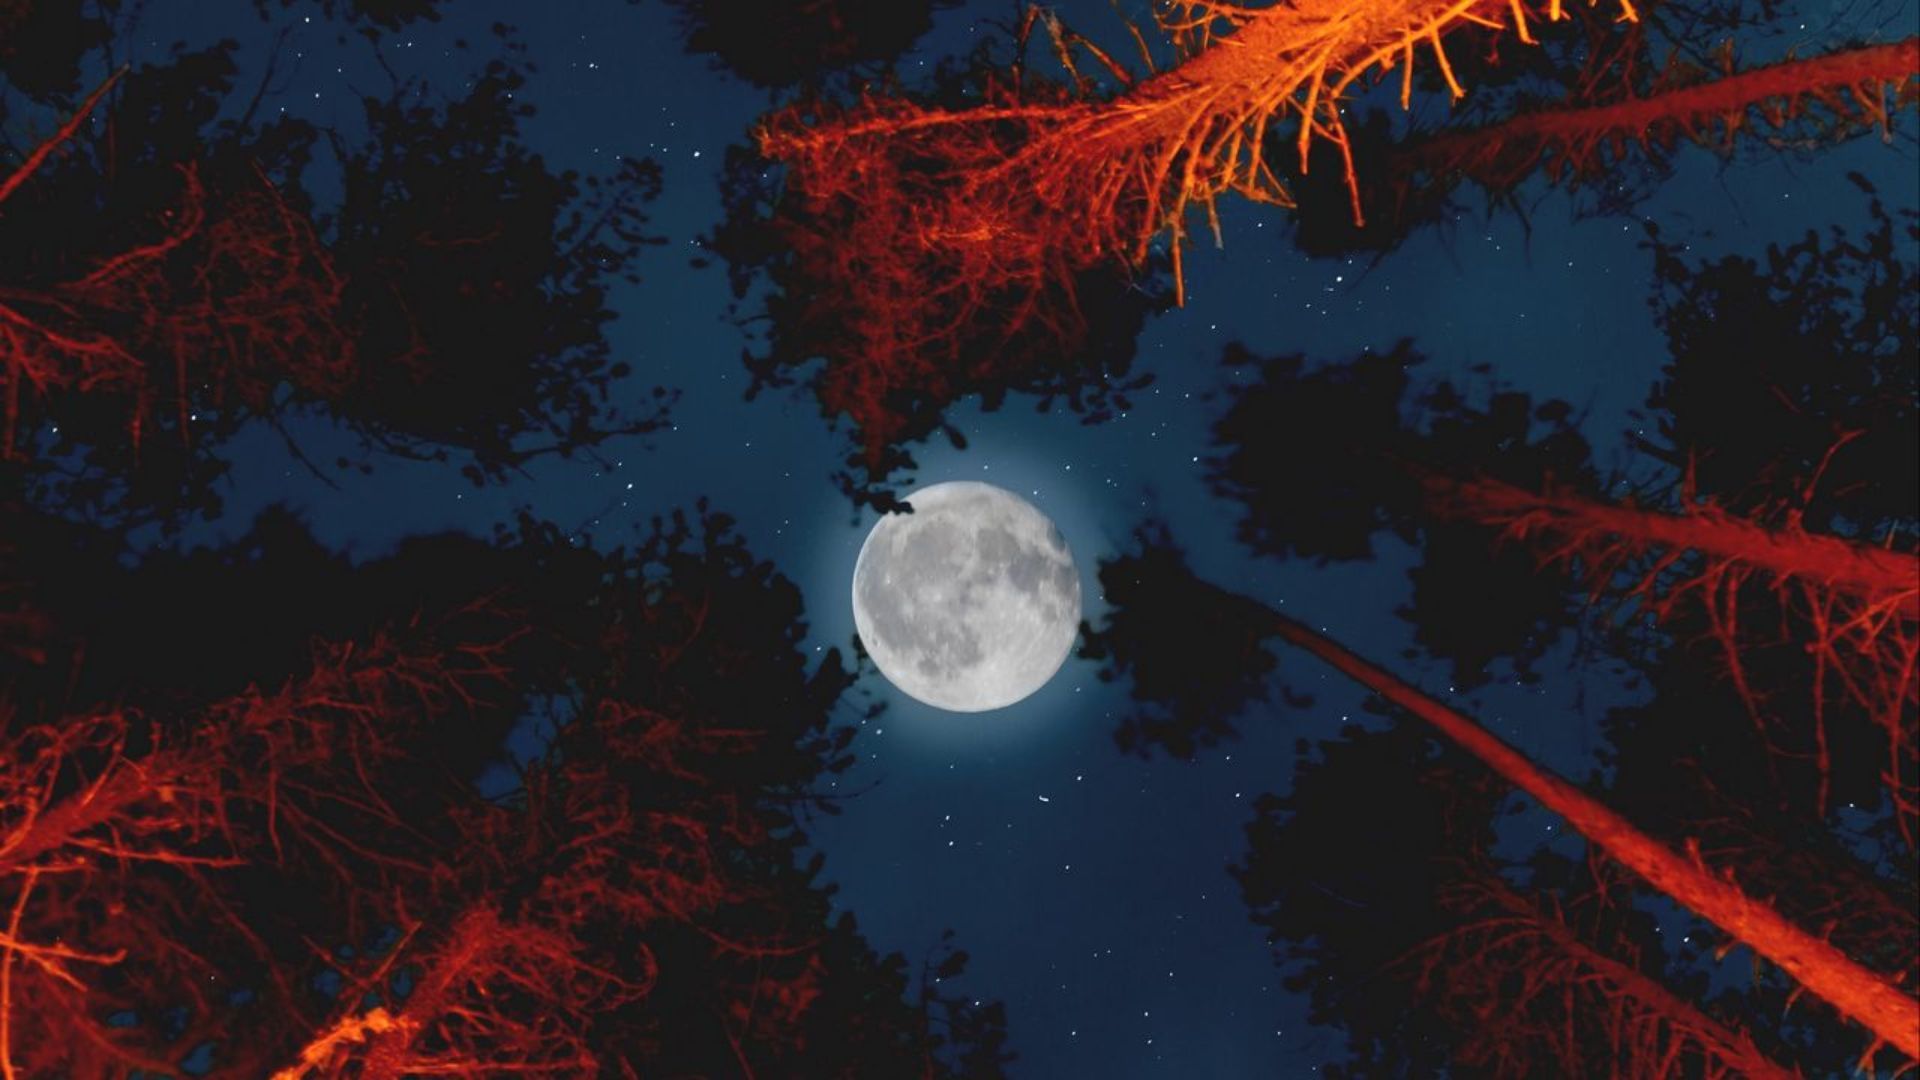 A full moon shines brightly in the night sky, surrounded by trees. - Moon